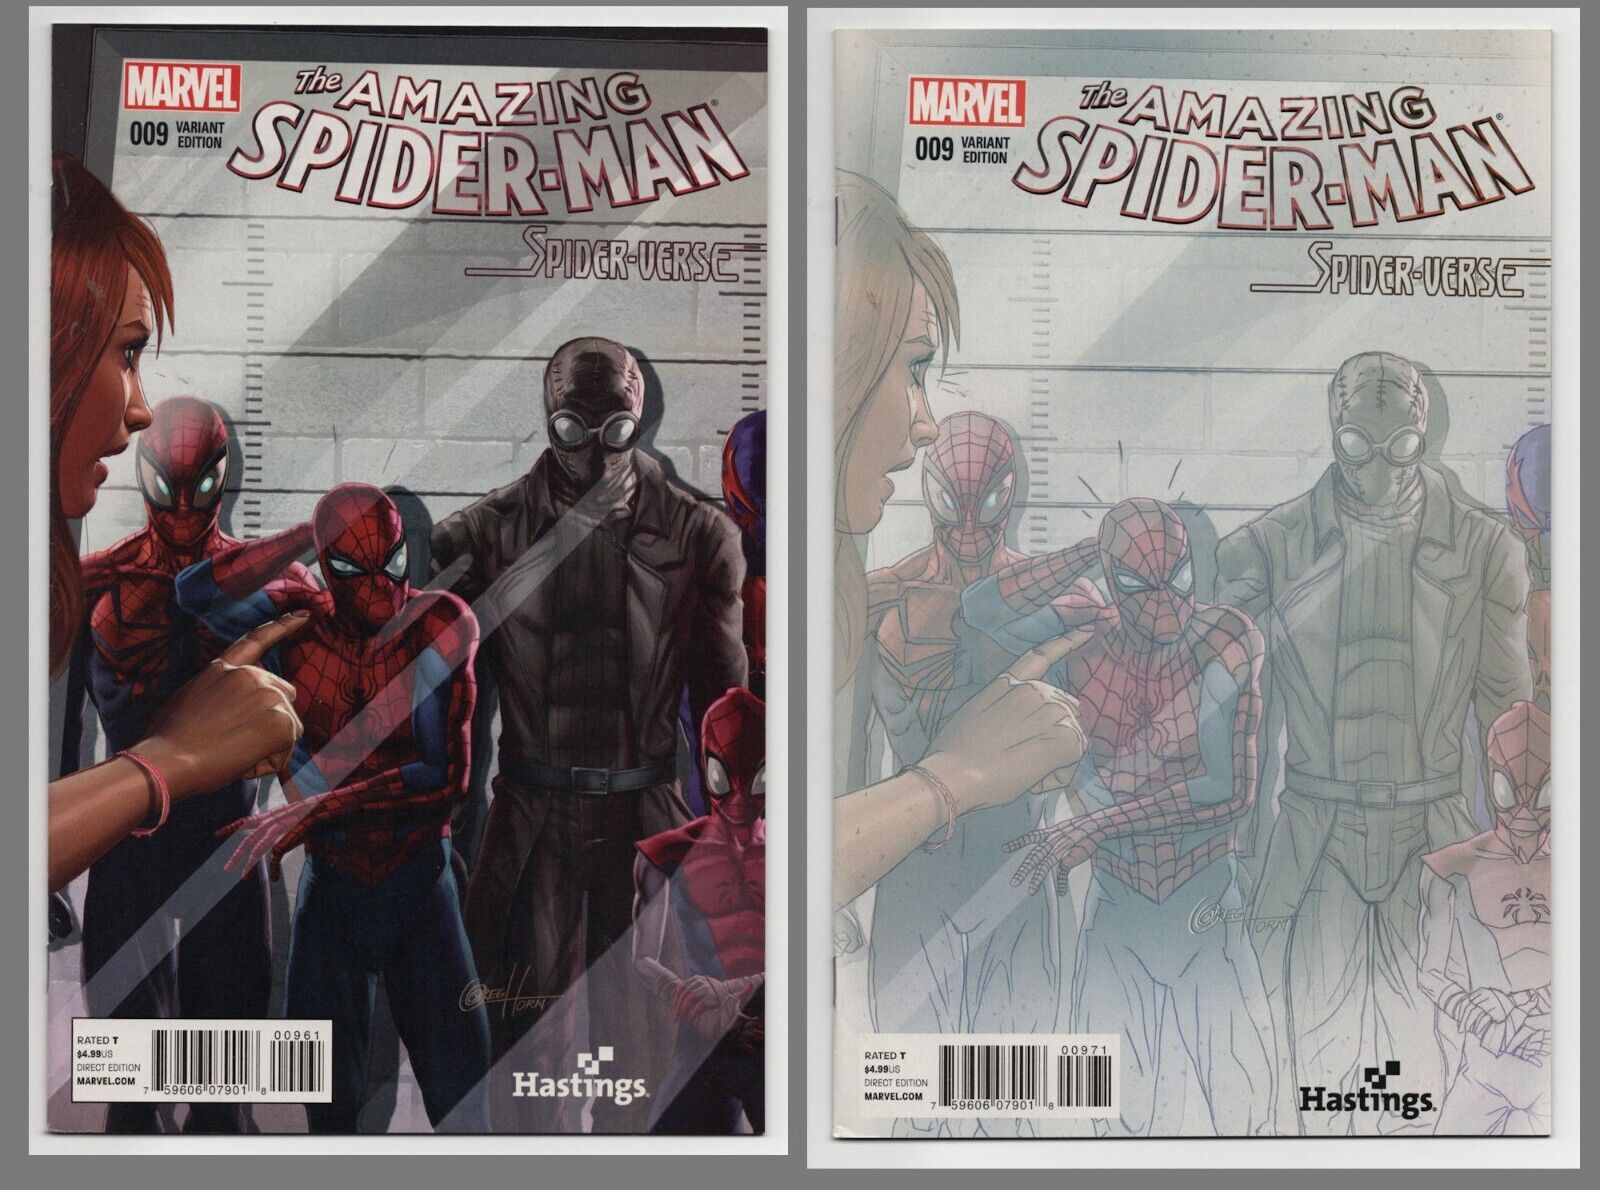 Lot of 2 AMAZING SPIDER-MAN #9 Hastings variants. Fade & color. High grade.